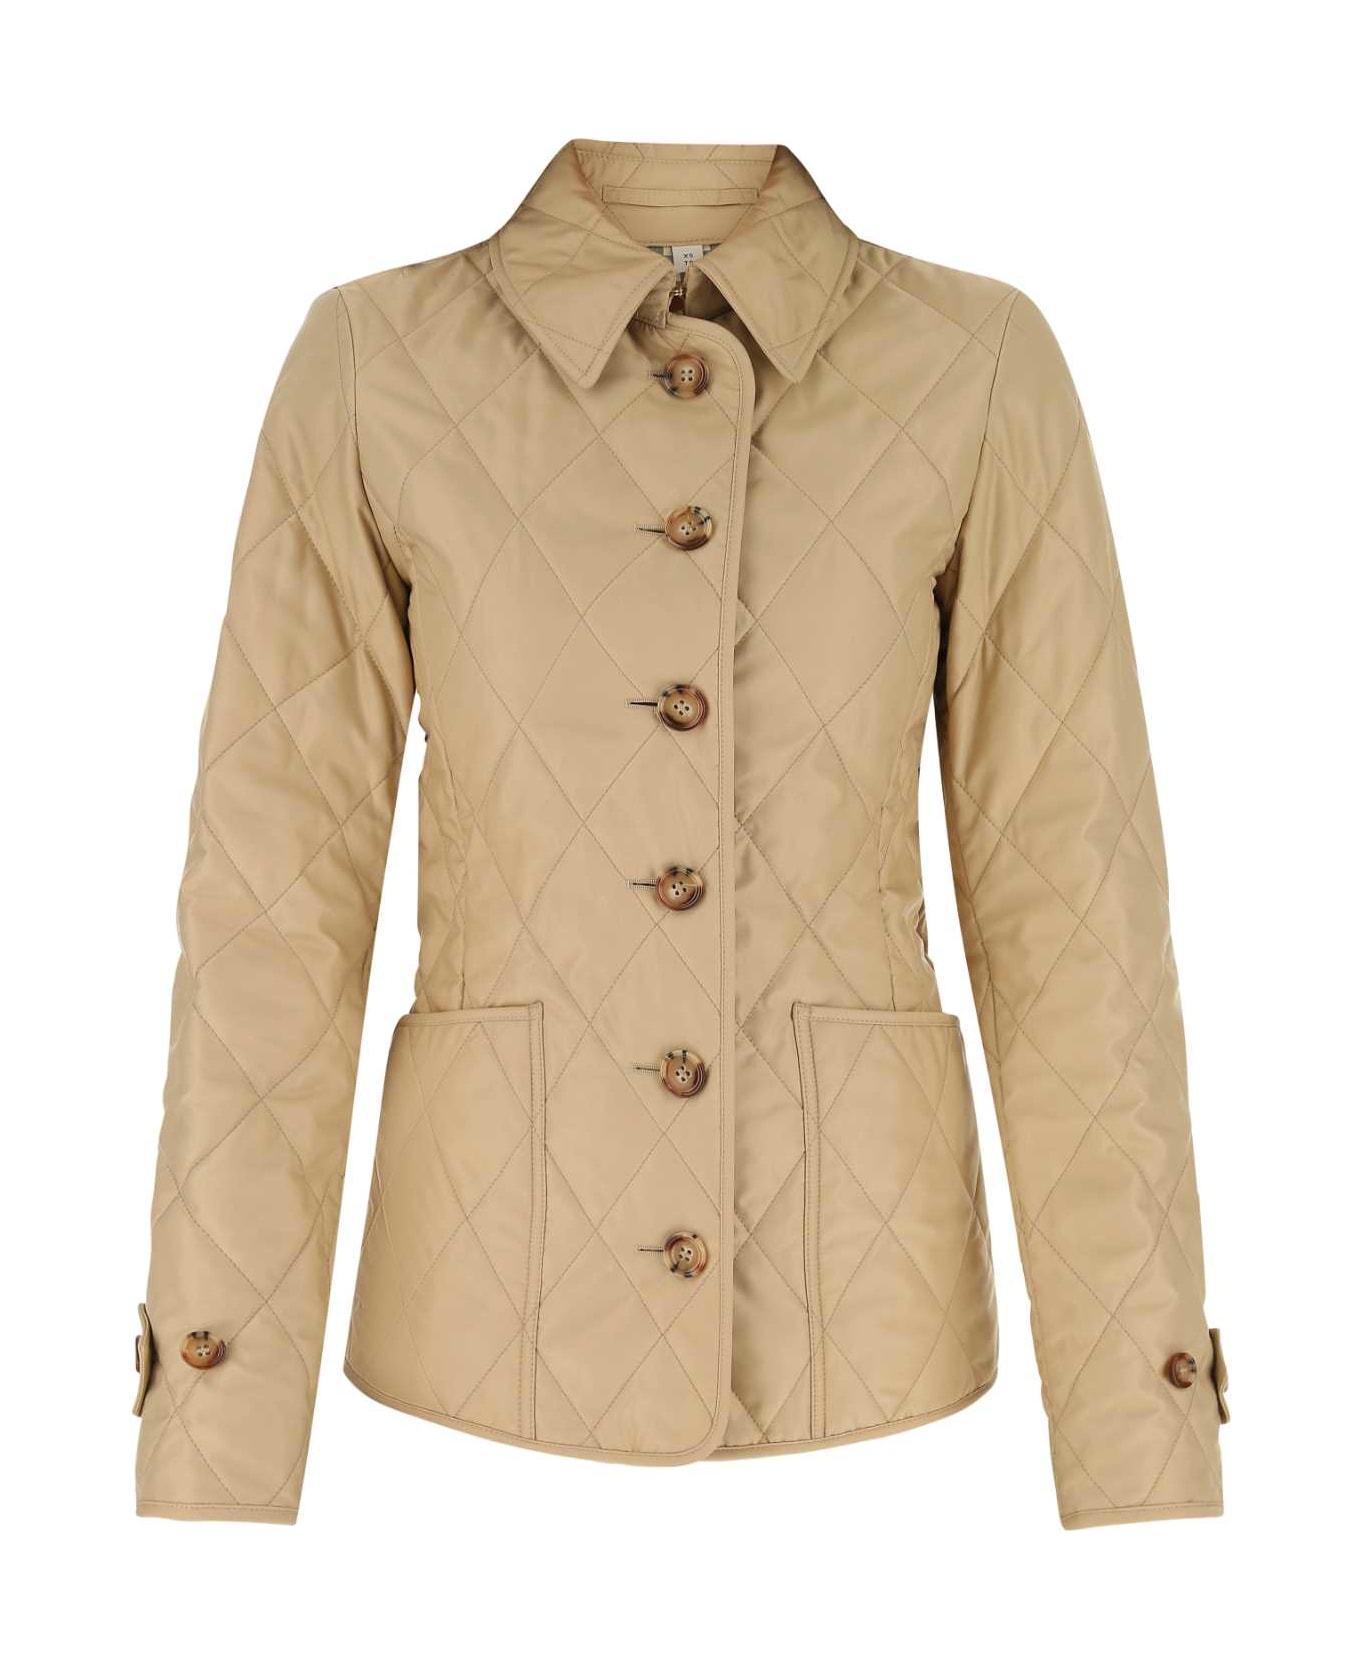 Burberry Beige Polyester Jacket - A4170